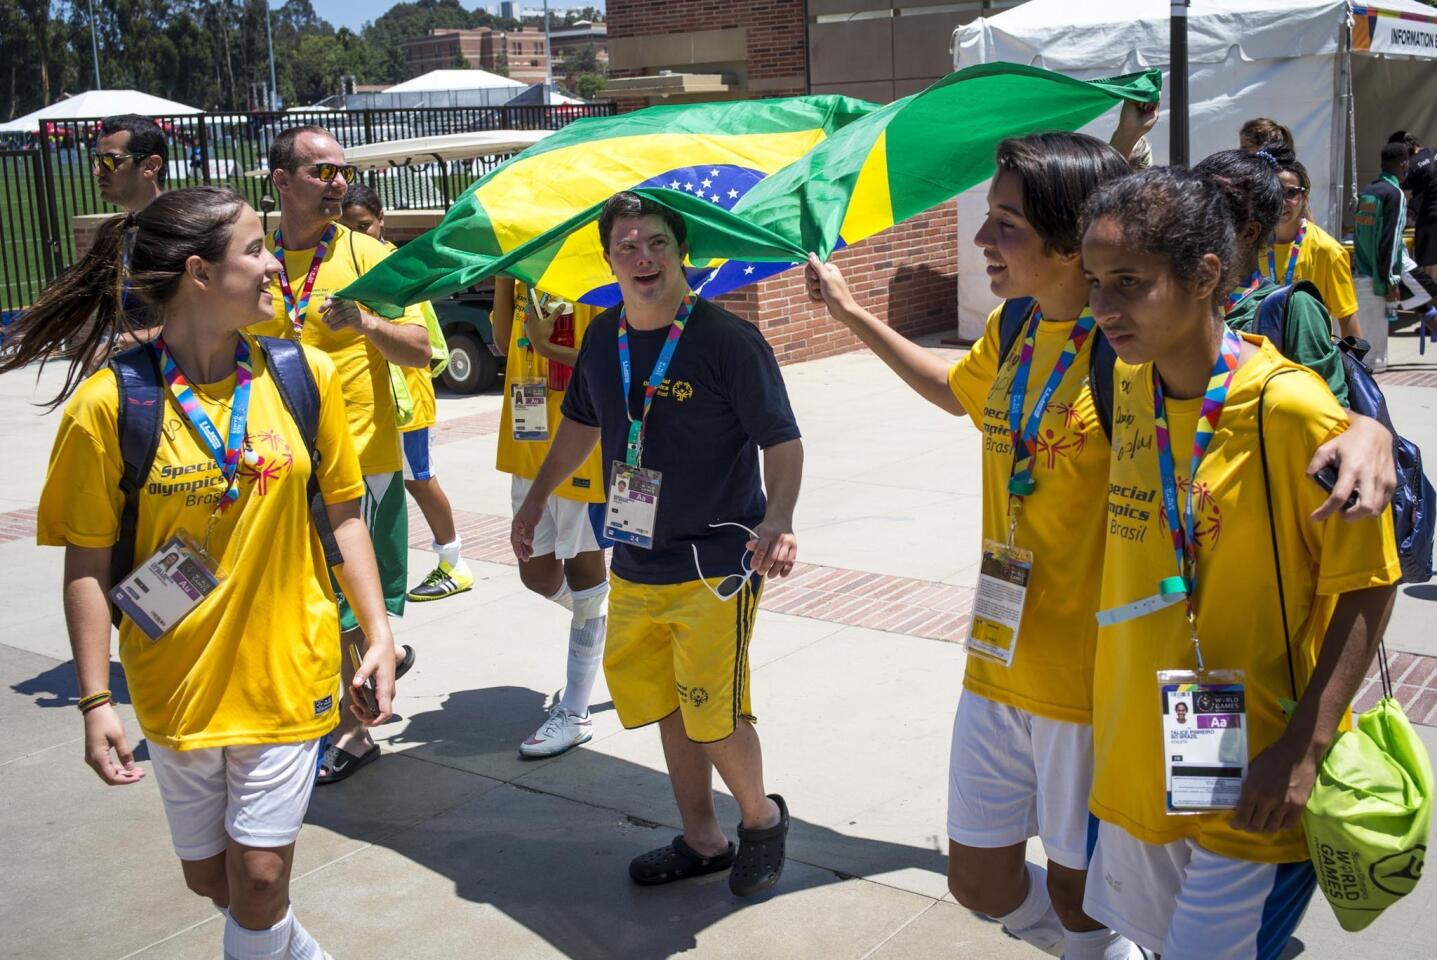 Athletes from Brazil carry their flag to their venue during the 2015 Special Olympic World Games at UCLA, Sunday, July 26, 2015, in Los Angeles. (David Crane/Los Angeles Daily News via AP) NO SALES; MAGS OUT; HILLS OUT, LOS ANGELES TIMES OUT; VENTURA COUNTY STAR OUT ANTELOPE VALLEY PRESS OUT; MANDATORY CREDIT